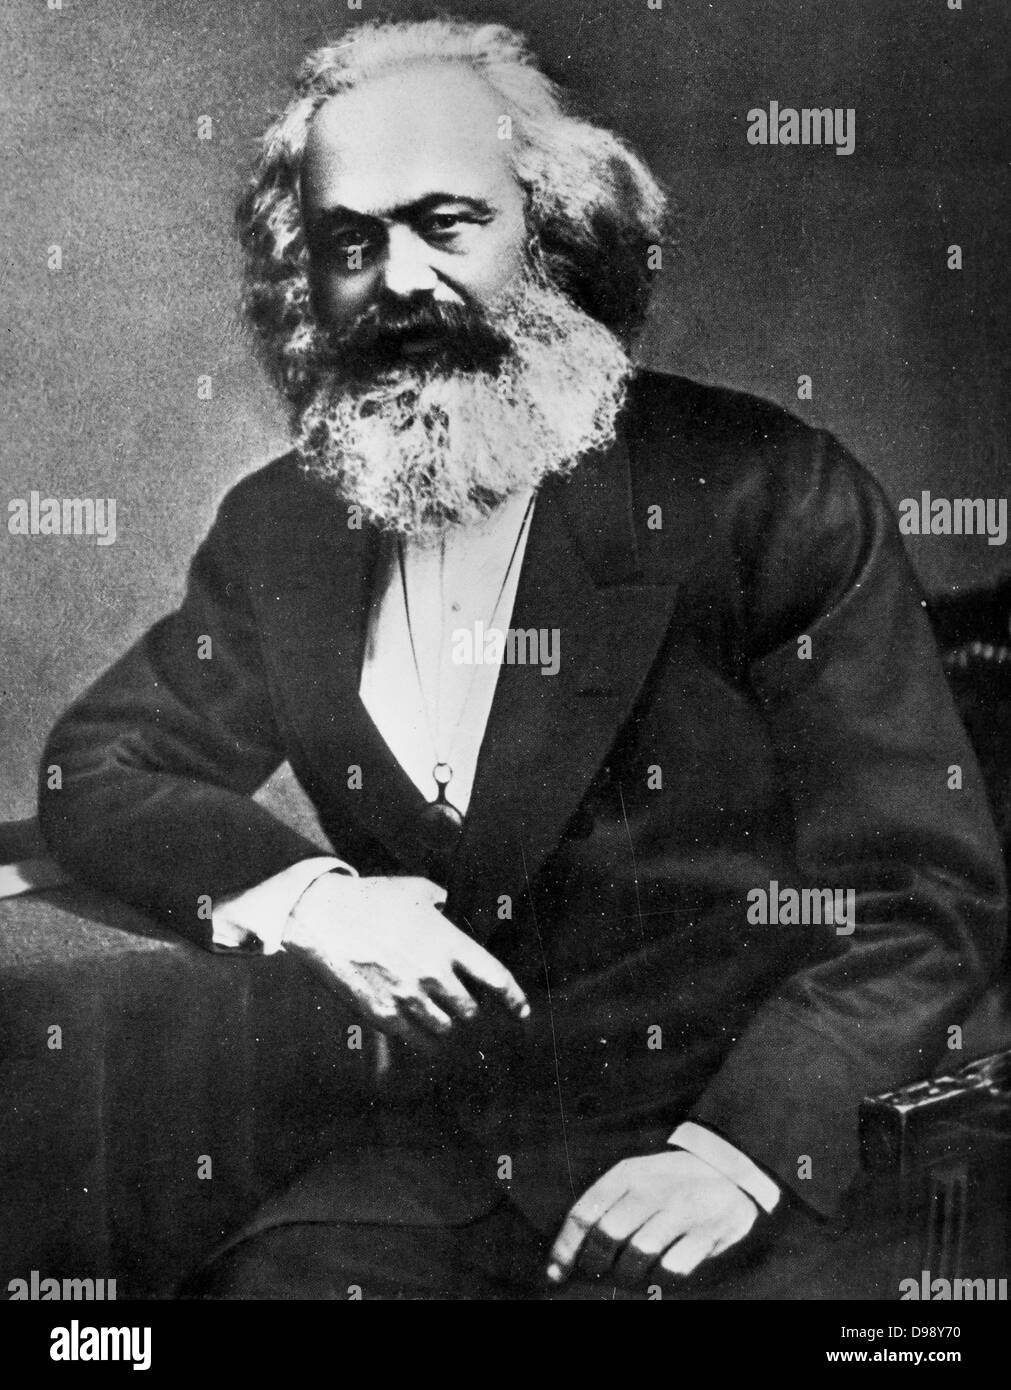 Karl Heinrich Marx (5 May 1818 – 14 March 1883) was a German philosopher, sociologist, economic historian, journalist, and revolutionary socialist. 1870 Stock Photo